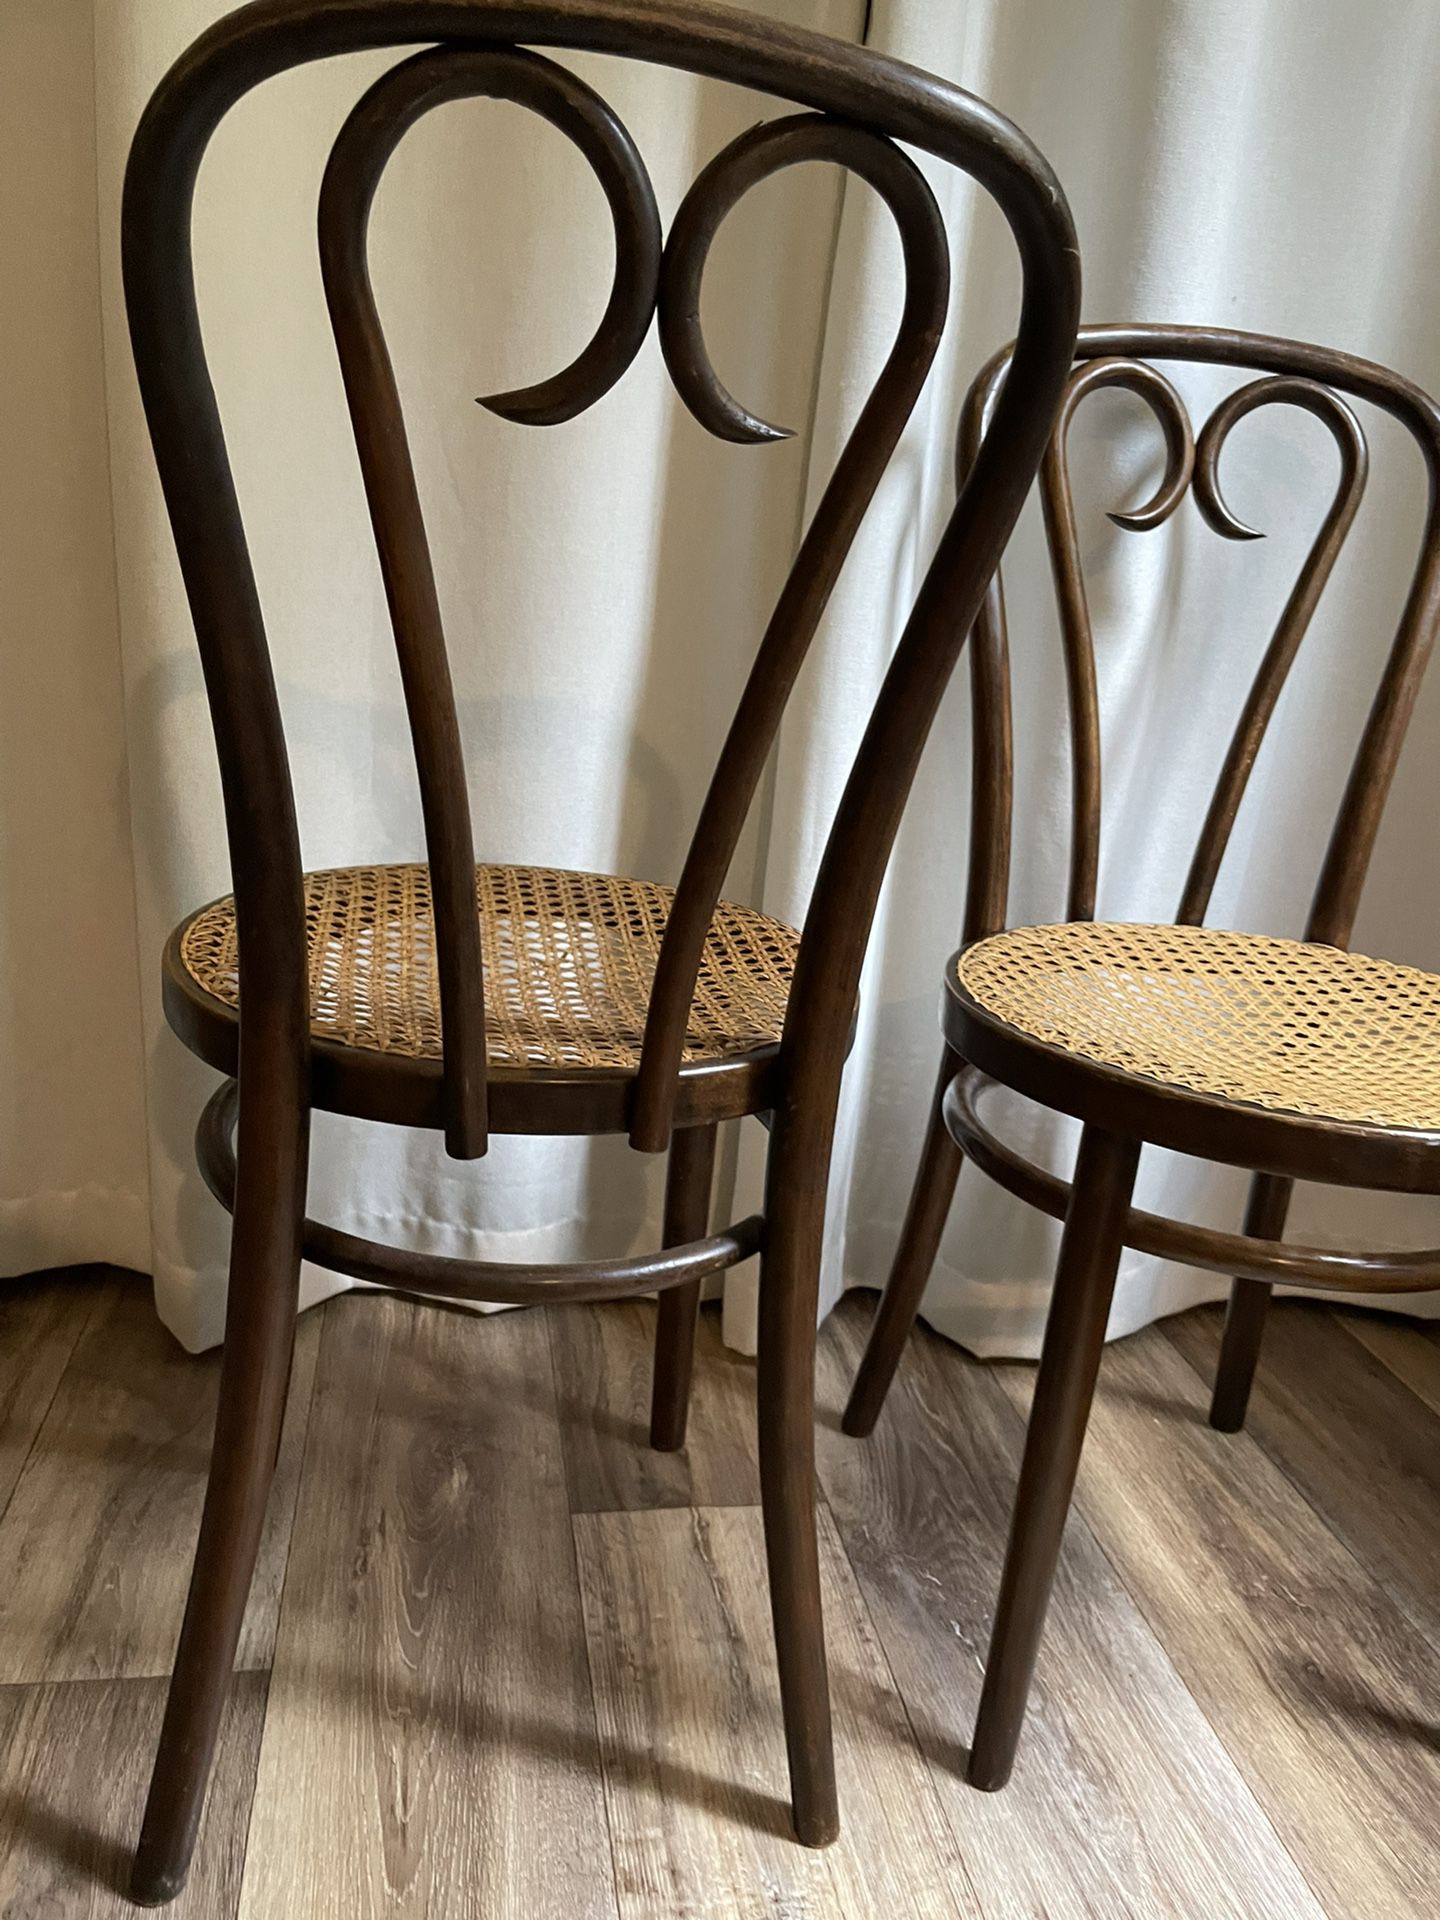 Pair of Vintage Bentwood Chairs with Cane Seats